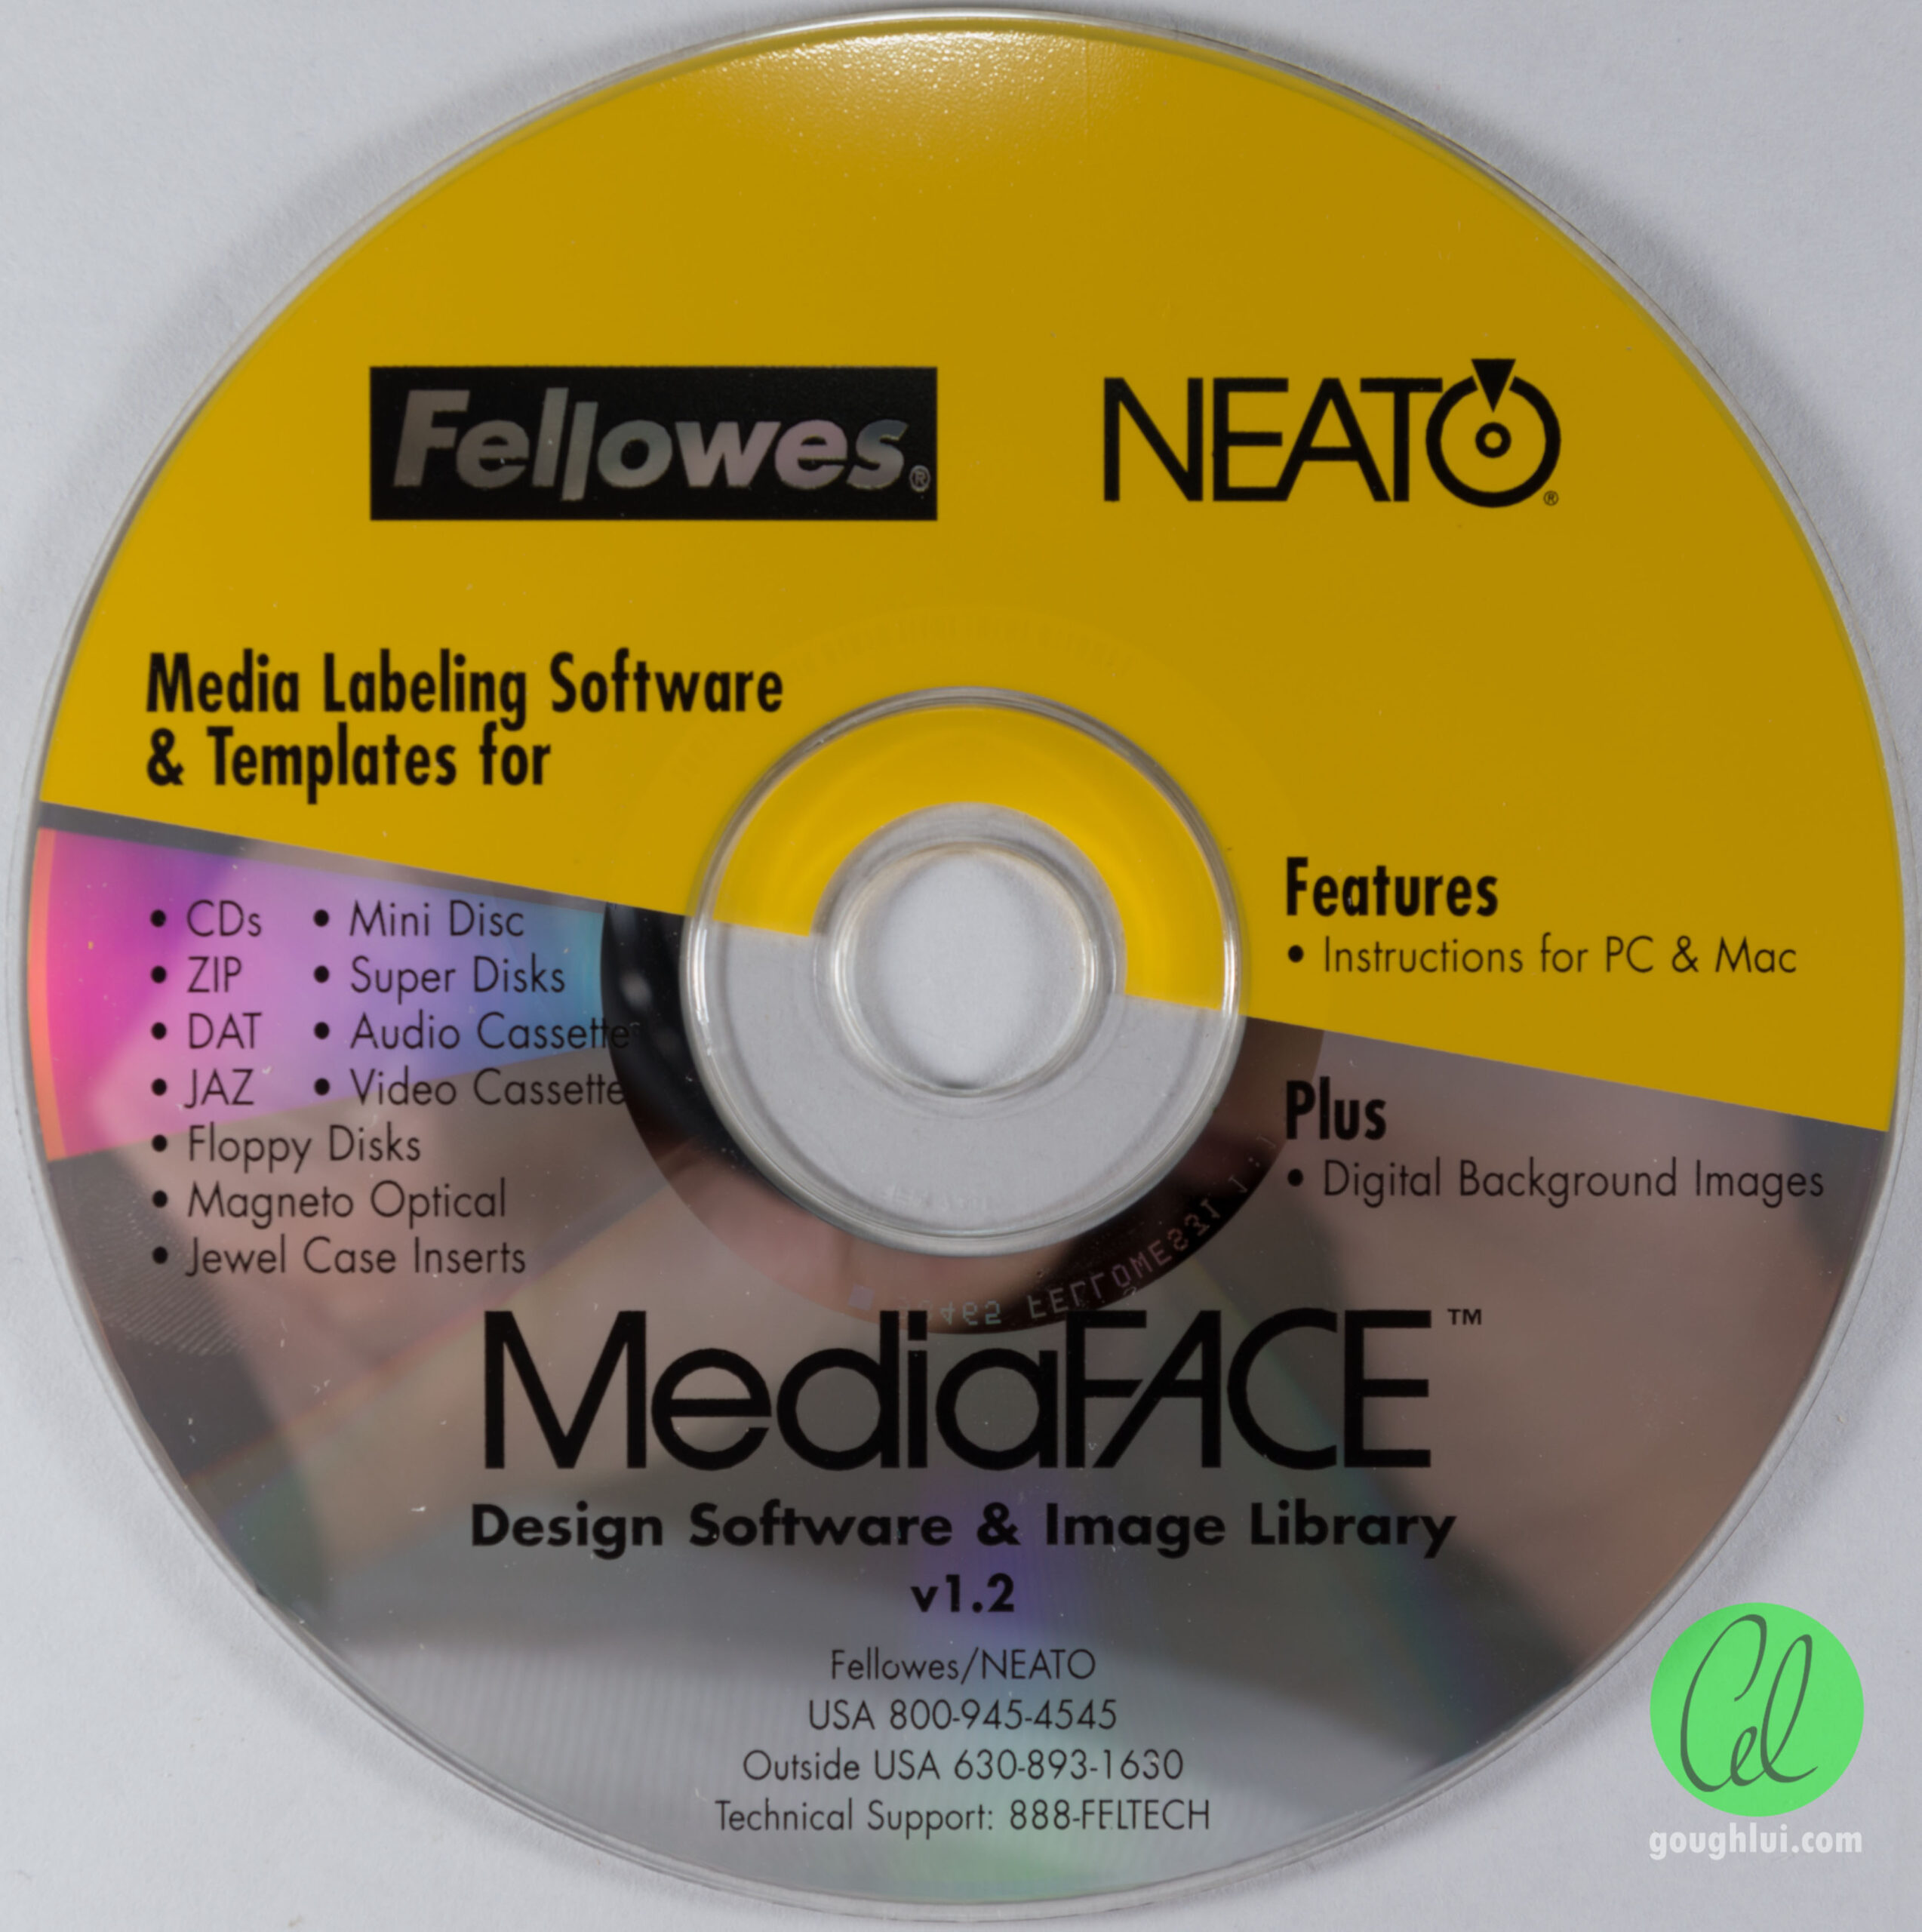 Tech Flashback: Fellowes Neato 2000 Cd Labeler Kit | Gough's In Neato By Fellowes Cd Label Template